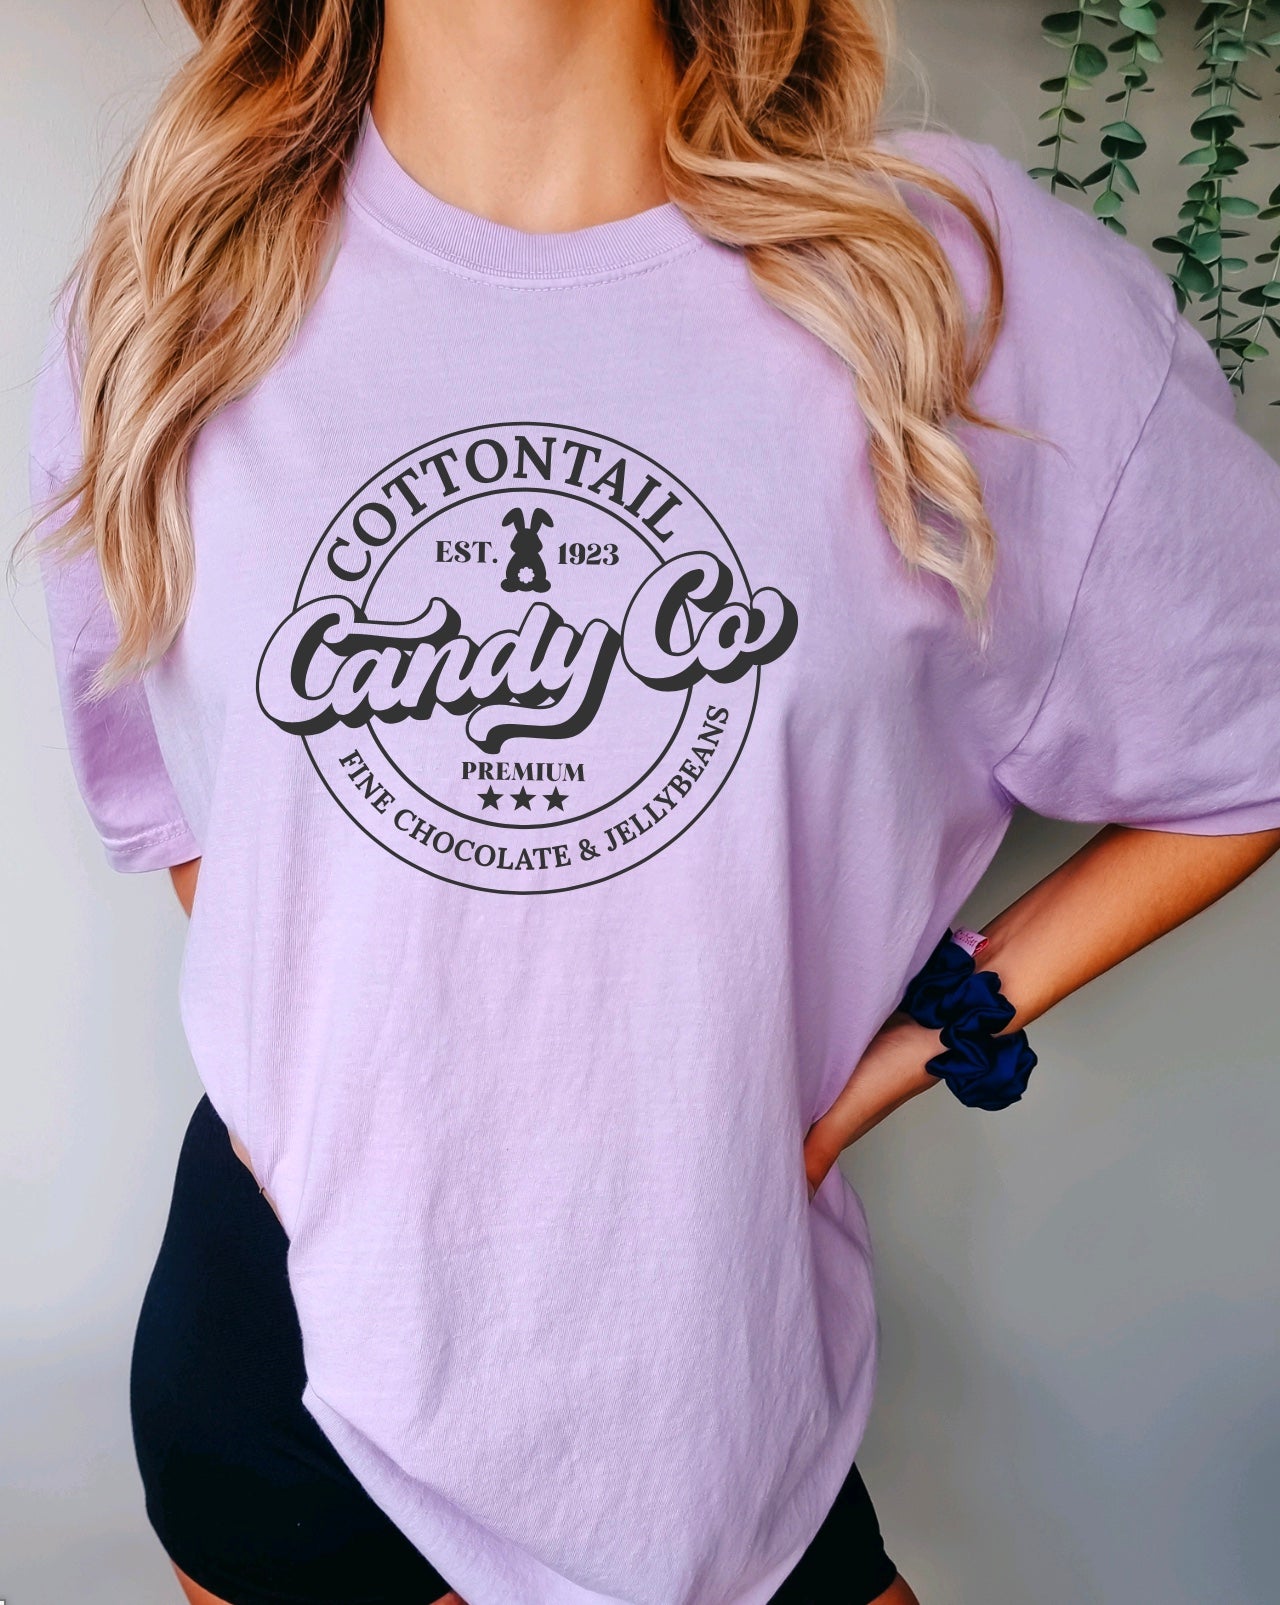 Cottontail candy co comfort colors Easter t-shirt for women in orchid 